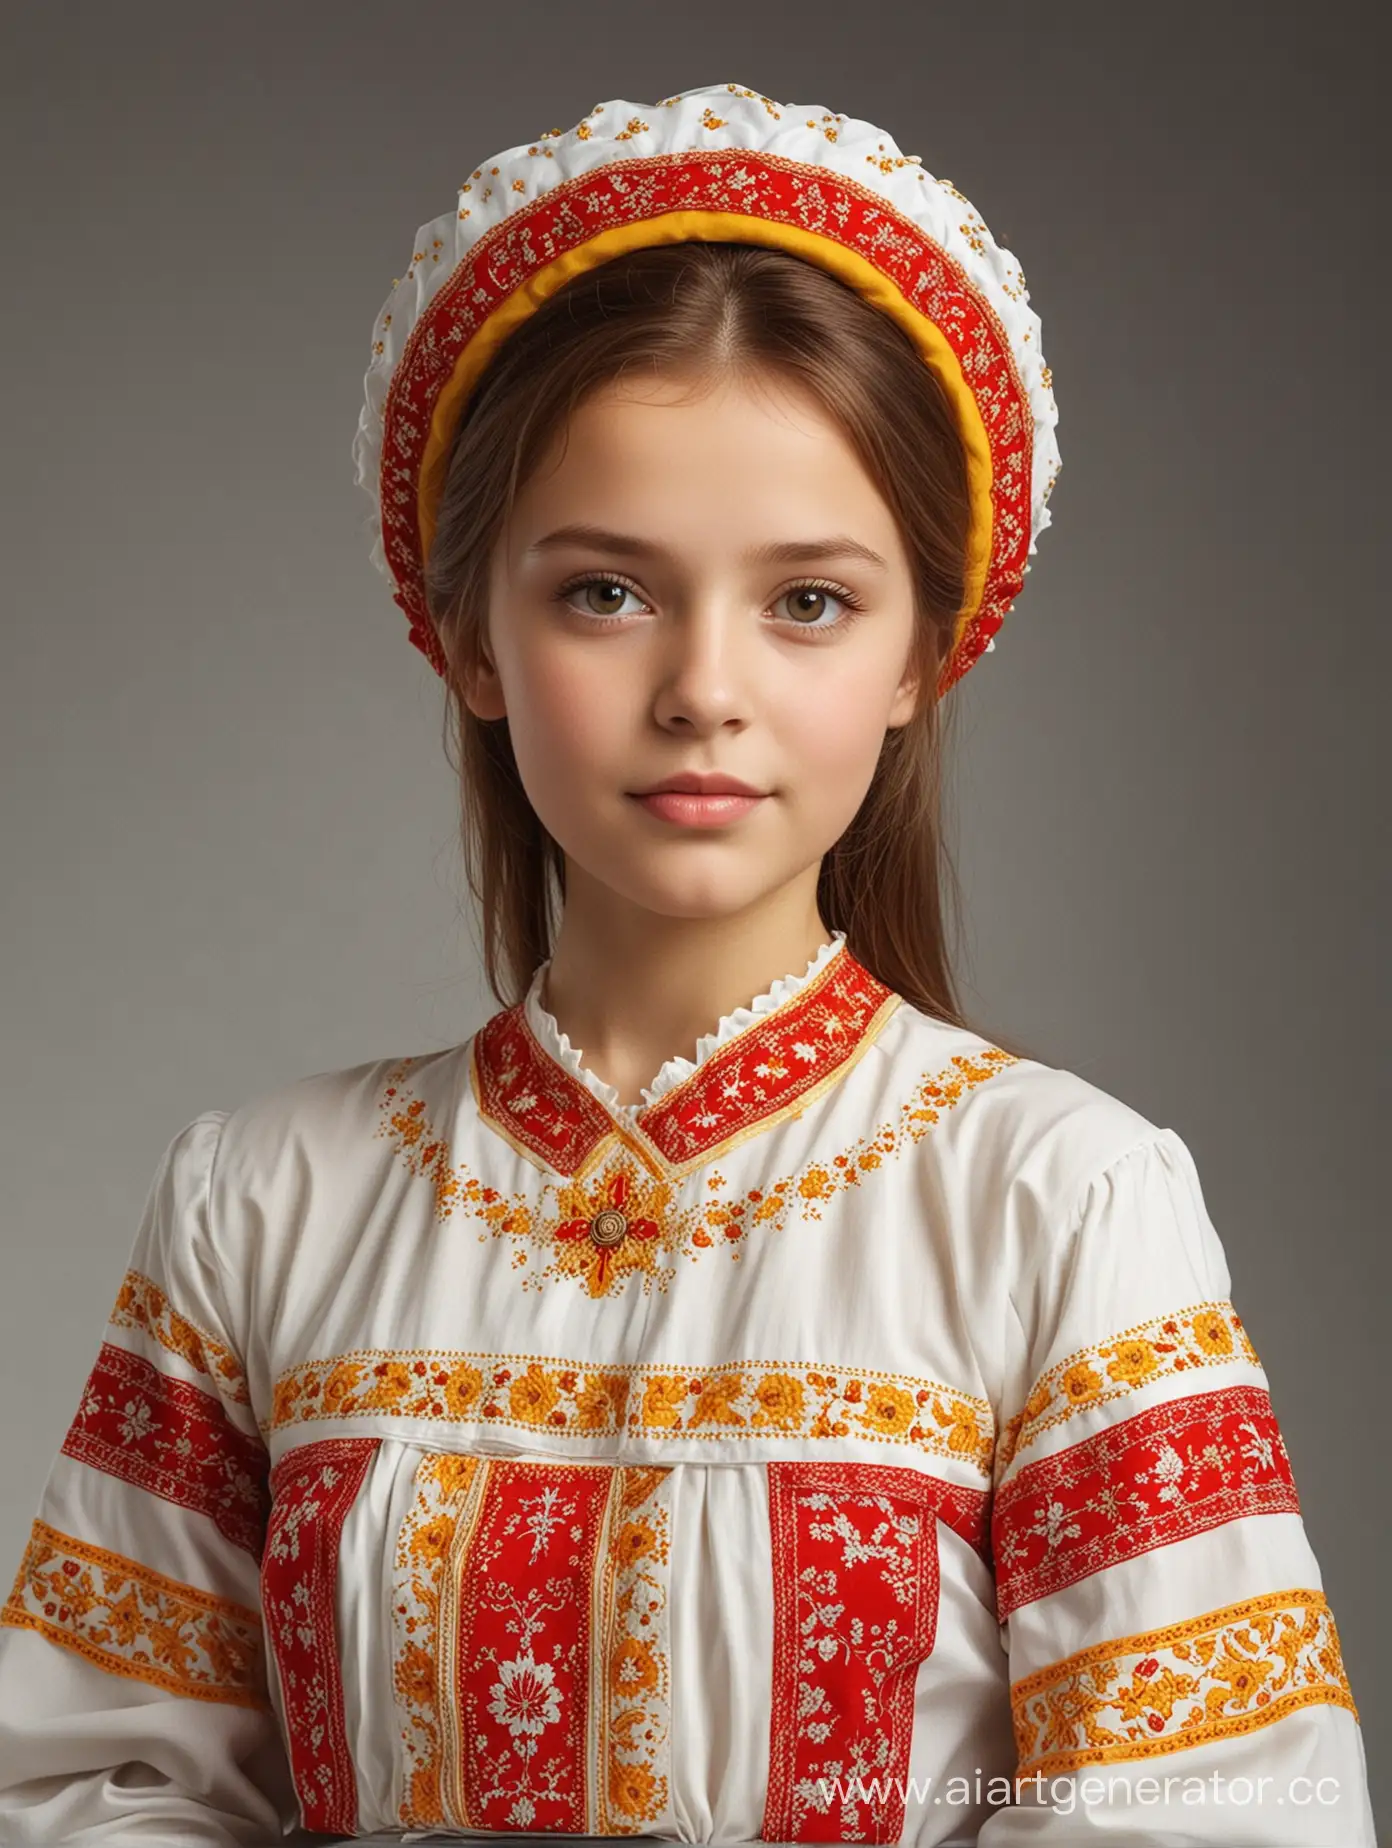 Chuvash-HoneyInspired-Character-Envisioning-a-Honeythemed-Girl-in-Traditional-Colors